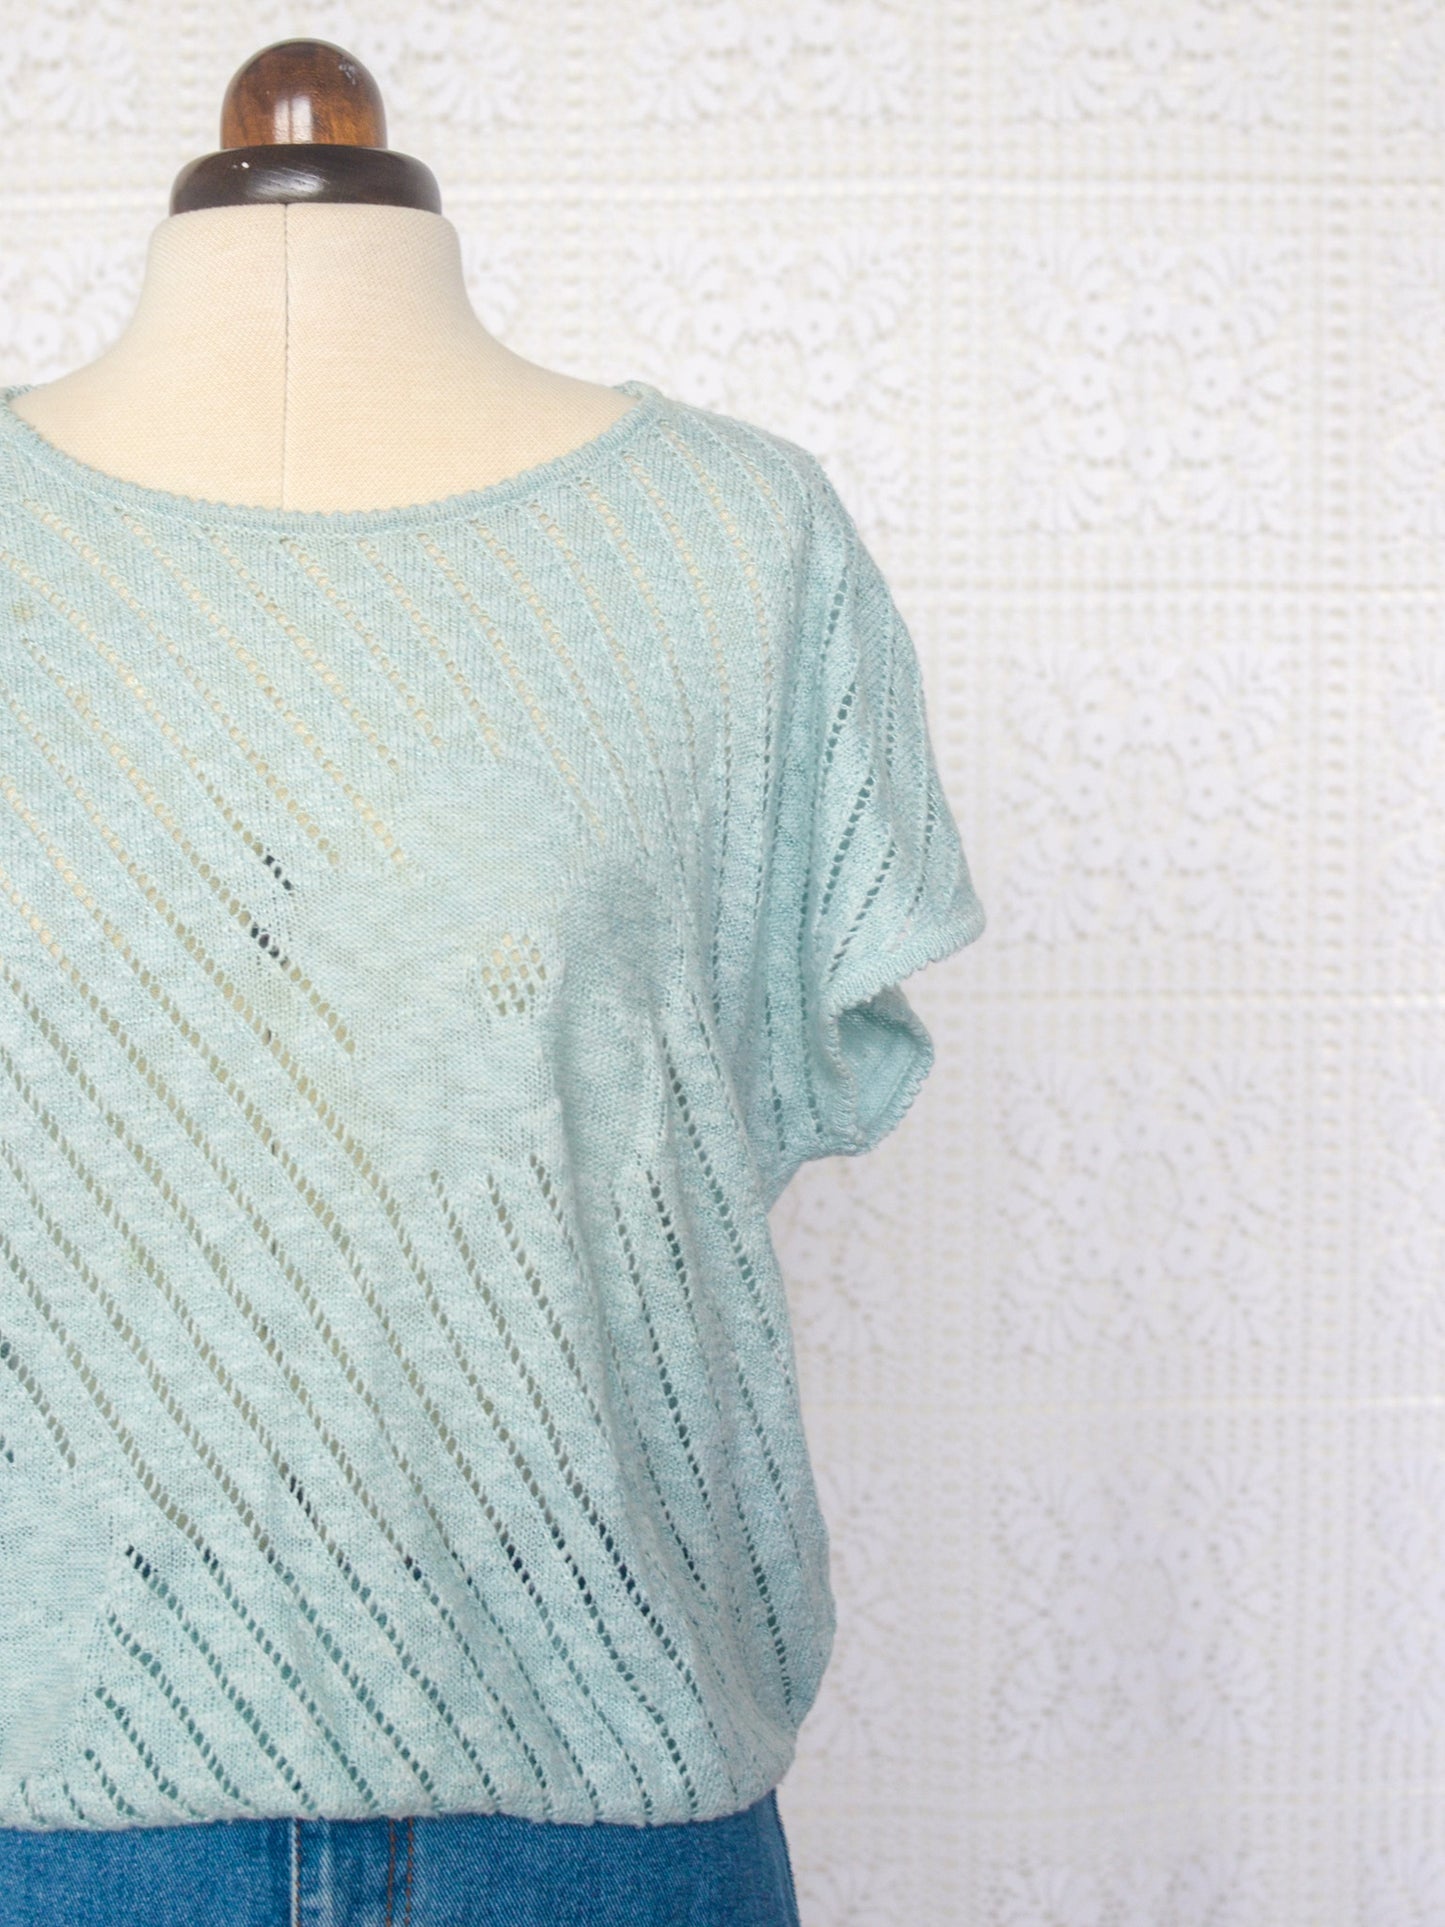 1980s style pale turquoise knitted short sleeve jumper with flower pattern